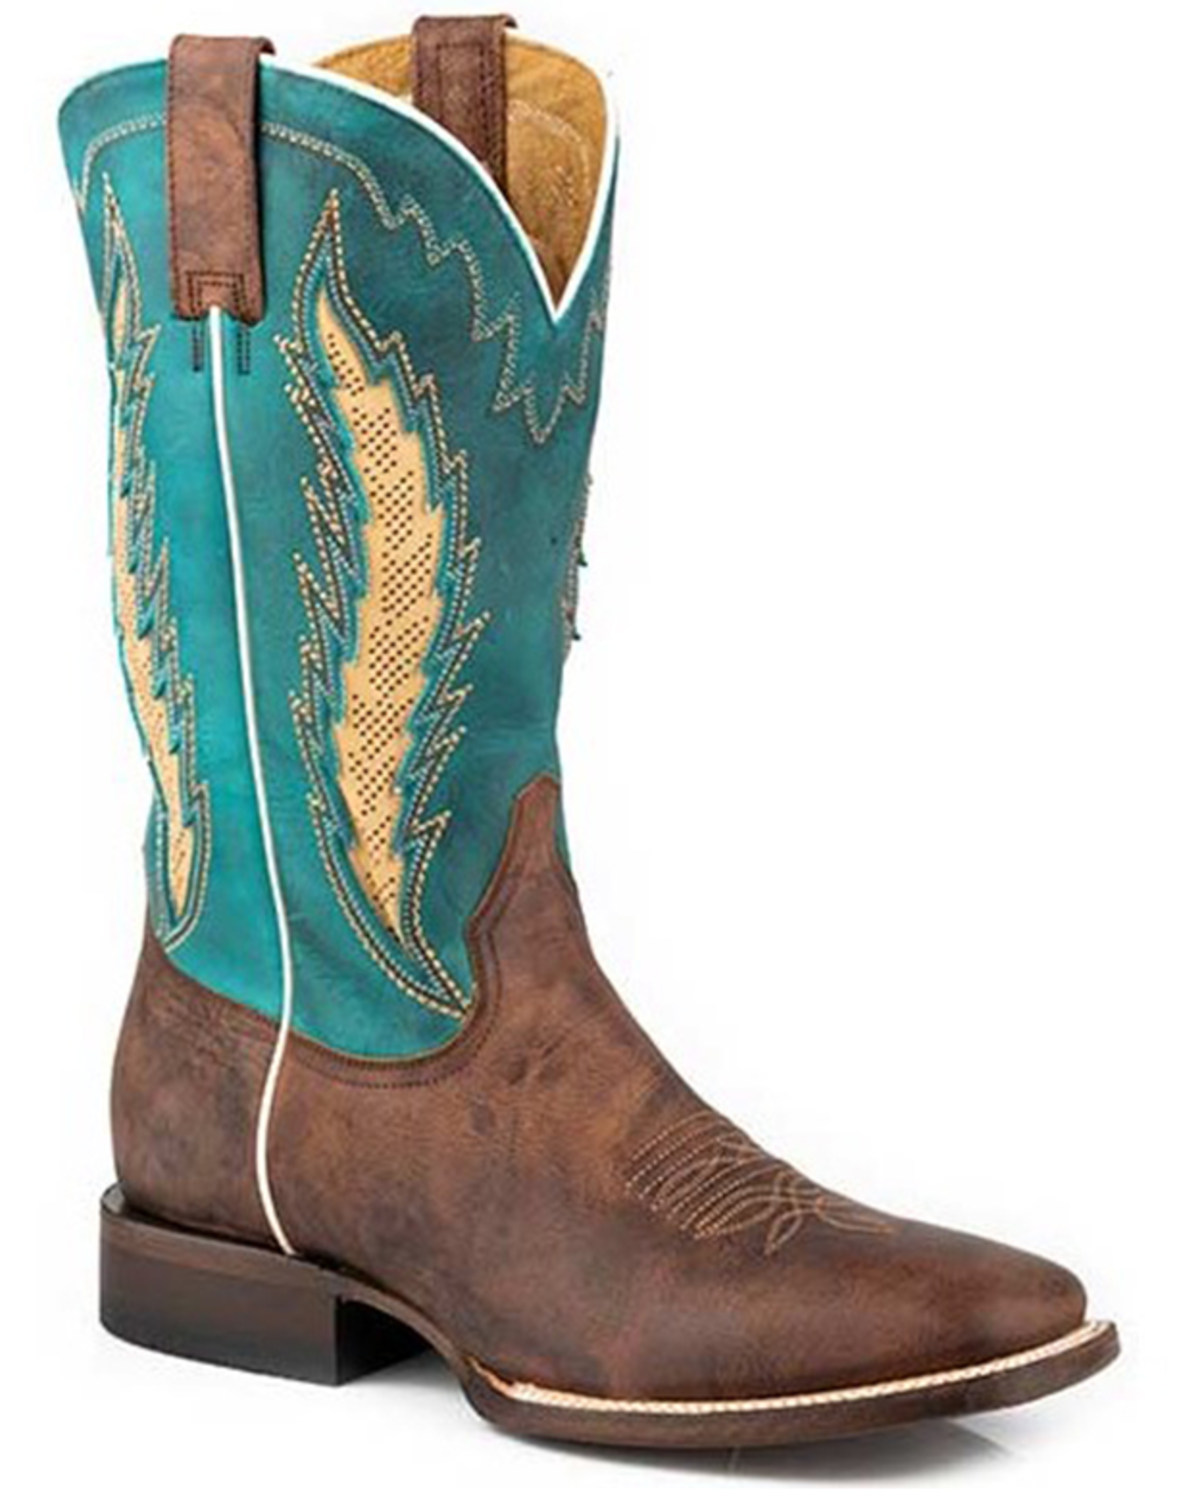 Stetson Men's Airflow Western Boots - Broad Square Toe